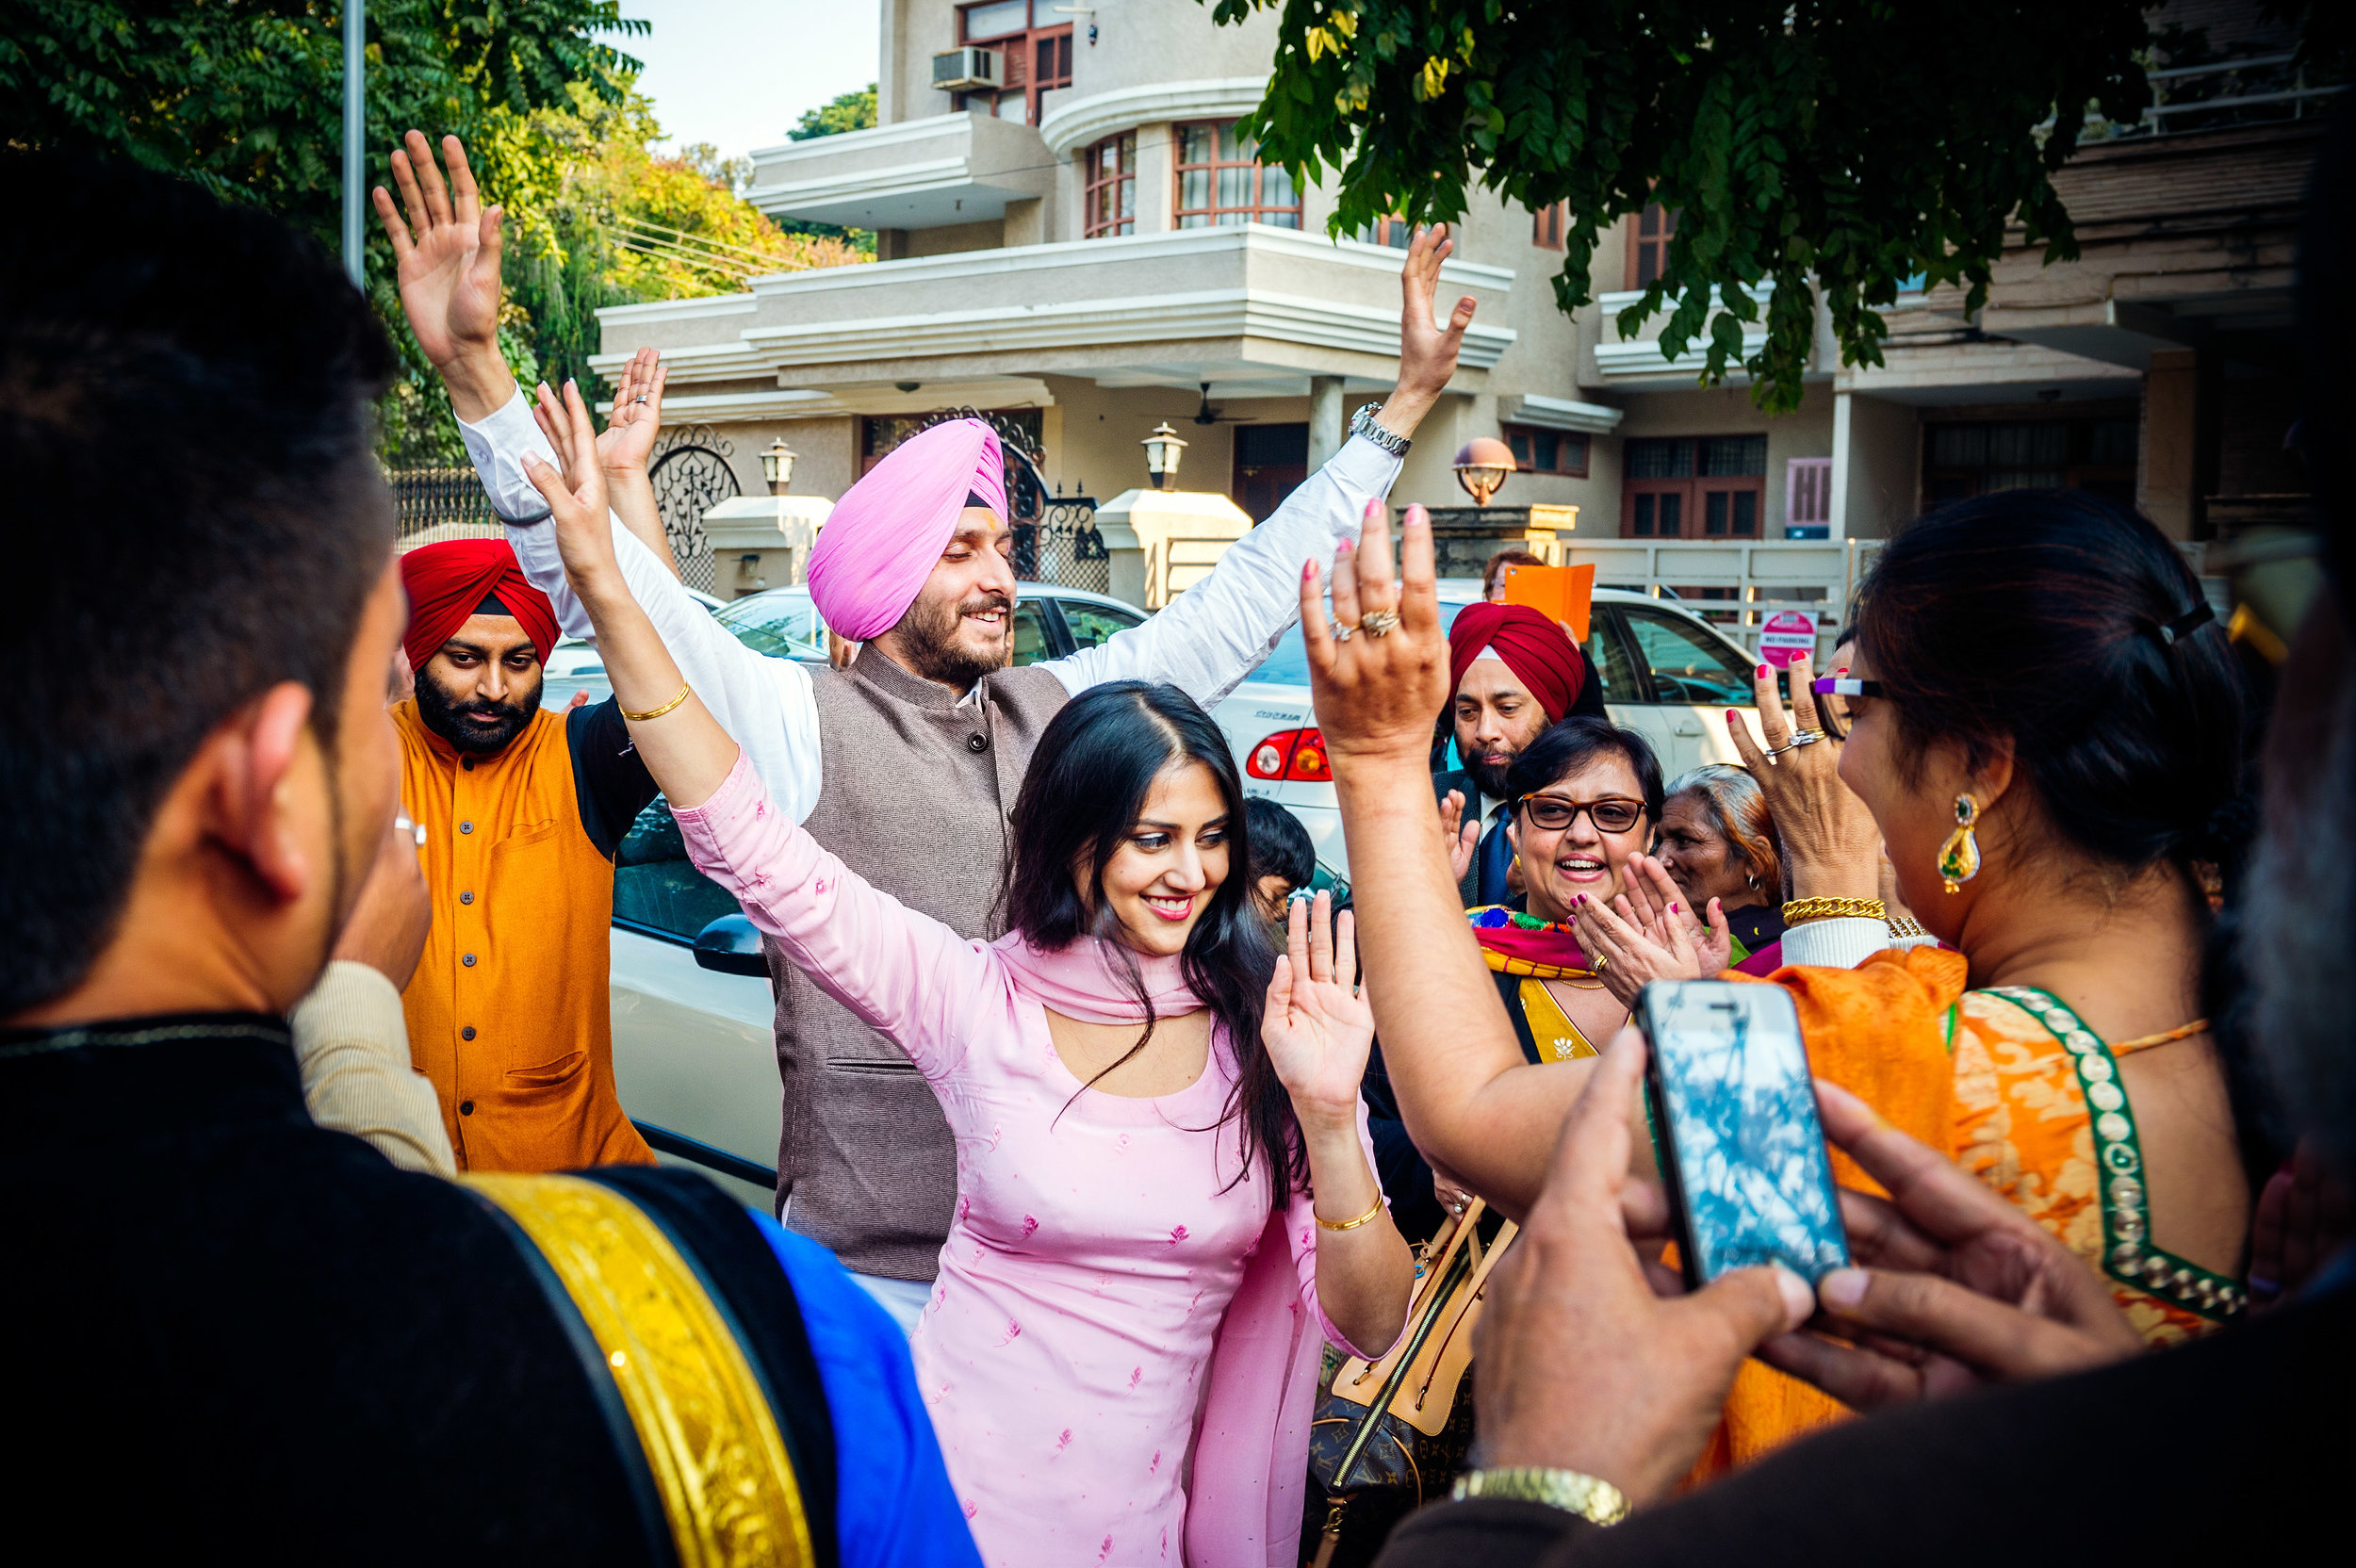  Likewise for the couple who were getting married, they were having lots of fun dancing in the streets towards the Gurudwara. 